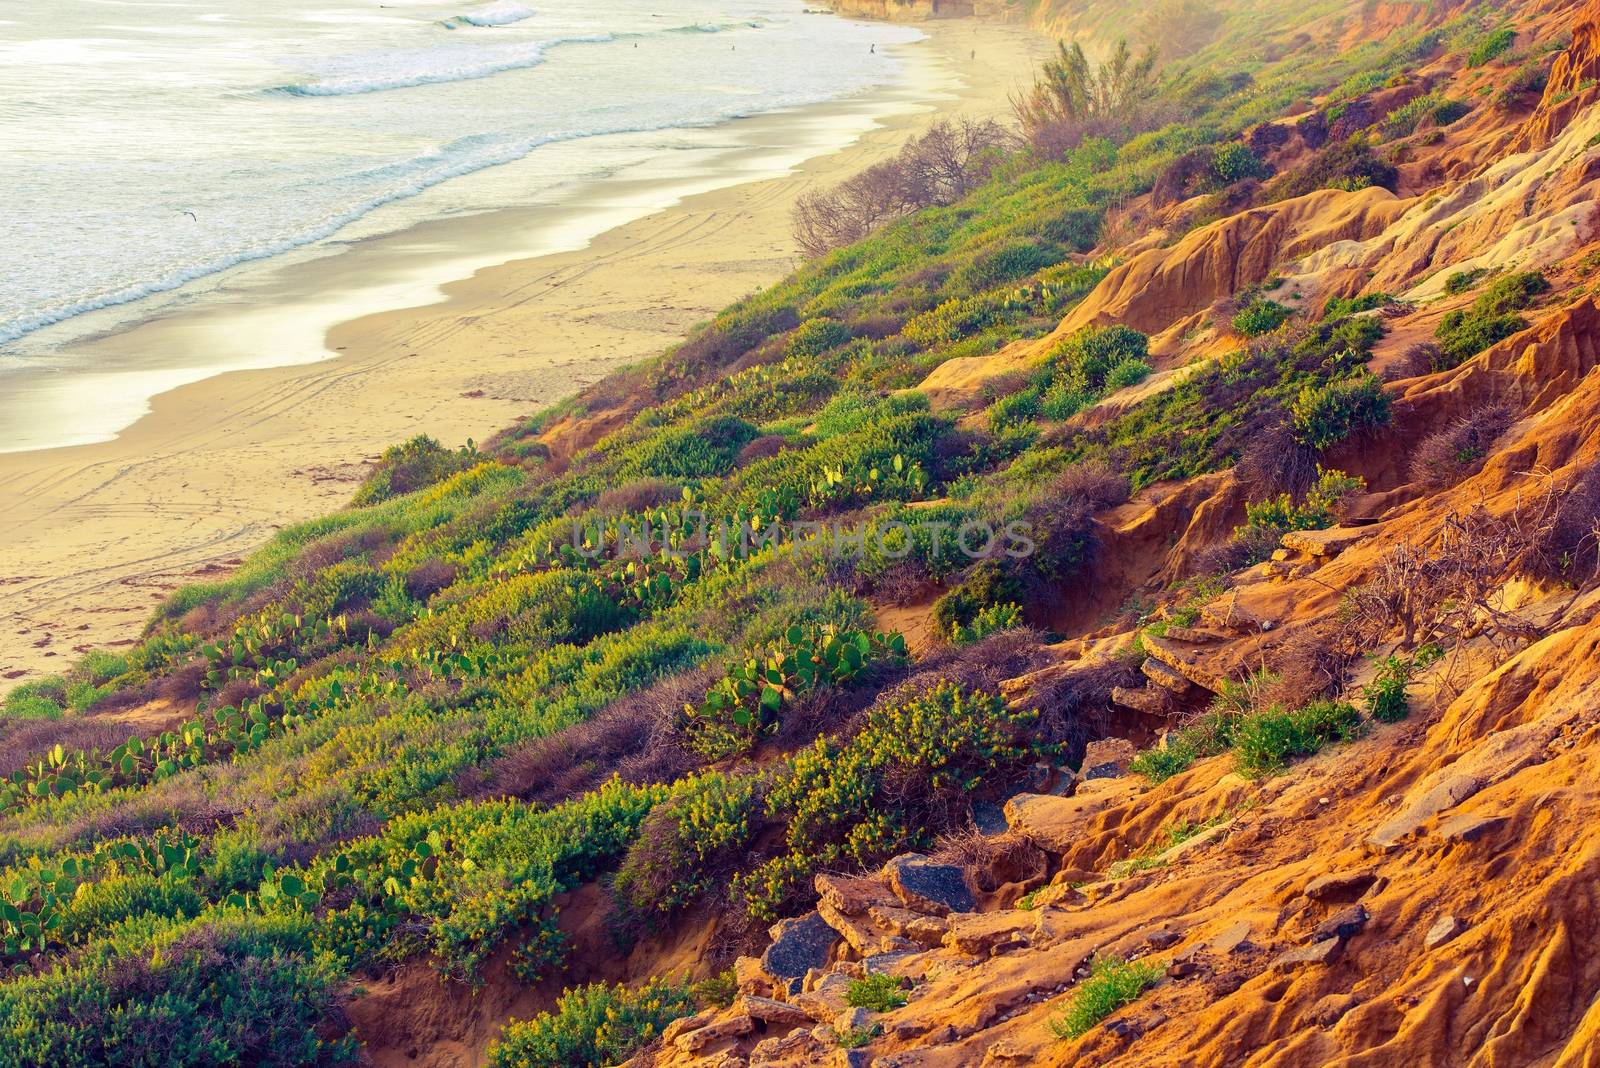 California Green and Sandy Ocean Shore. Beach Plants and Flowers. California, United States. 